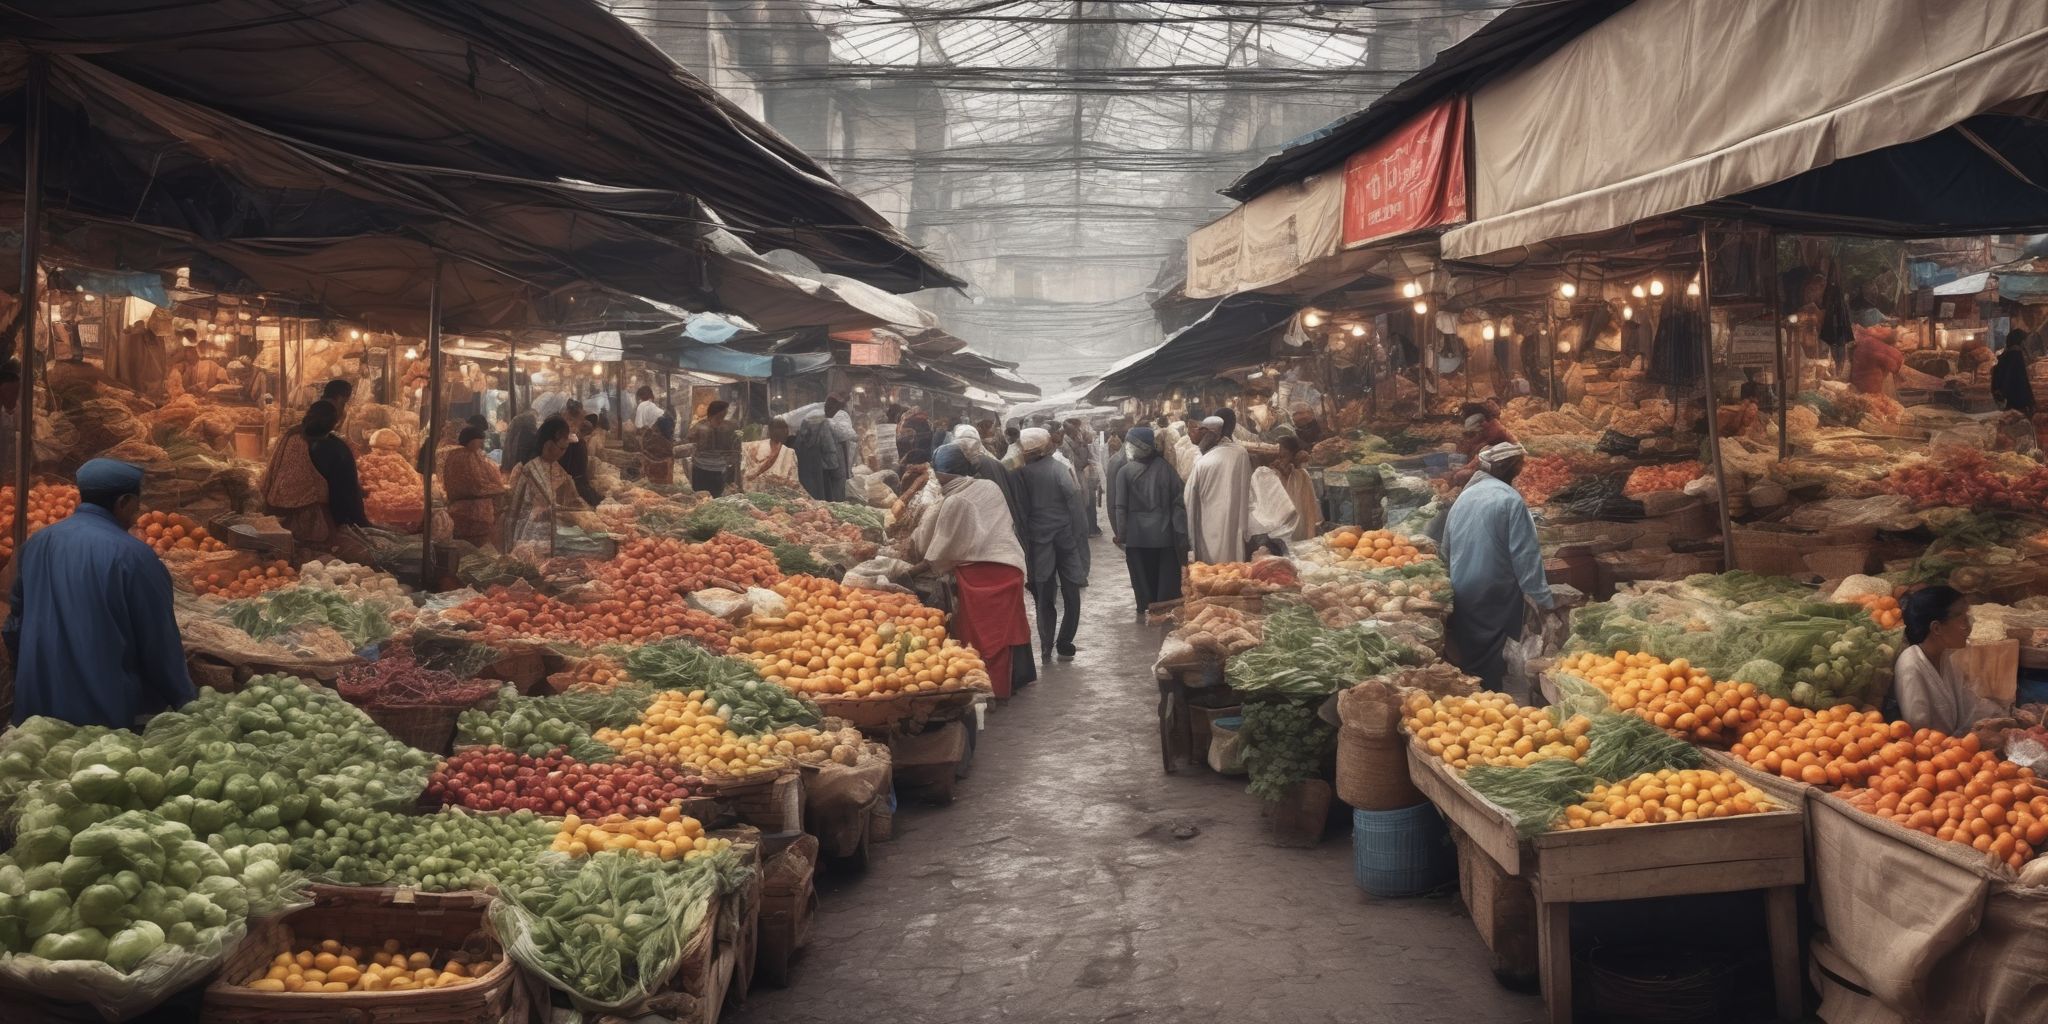 Market  in realistic, photographic style